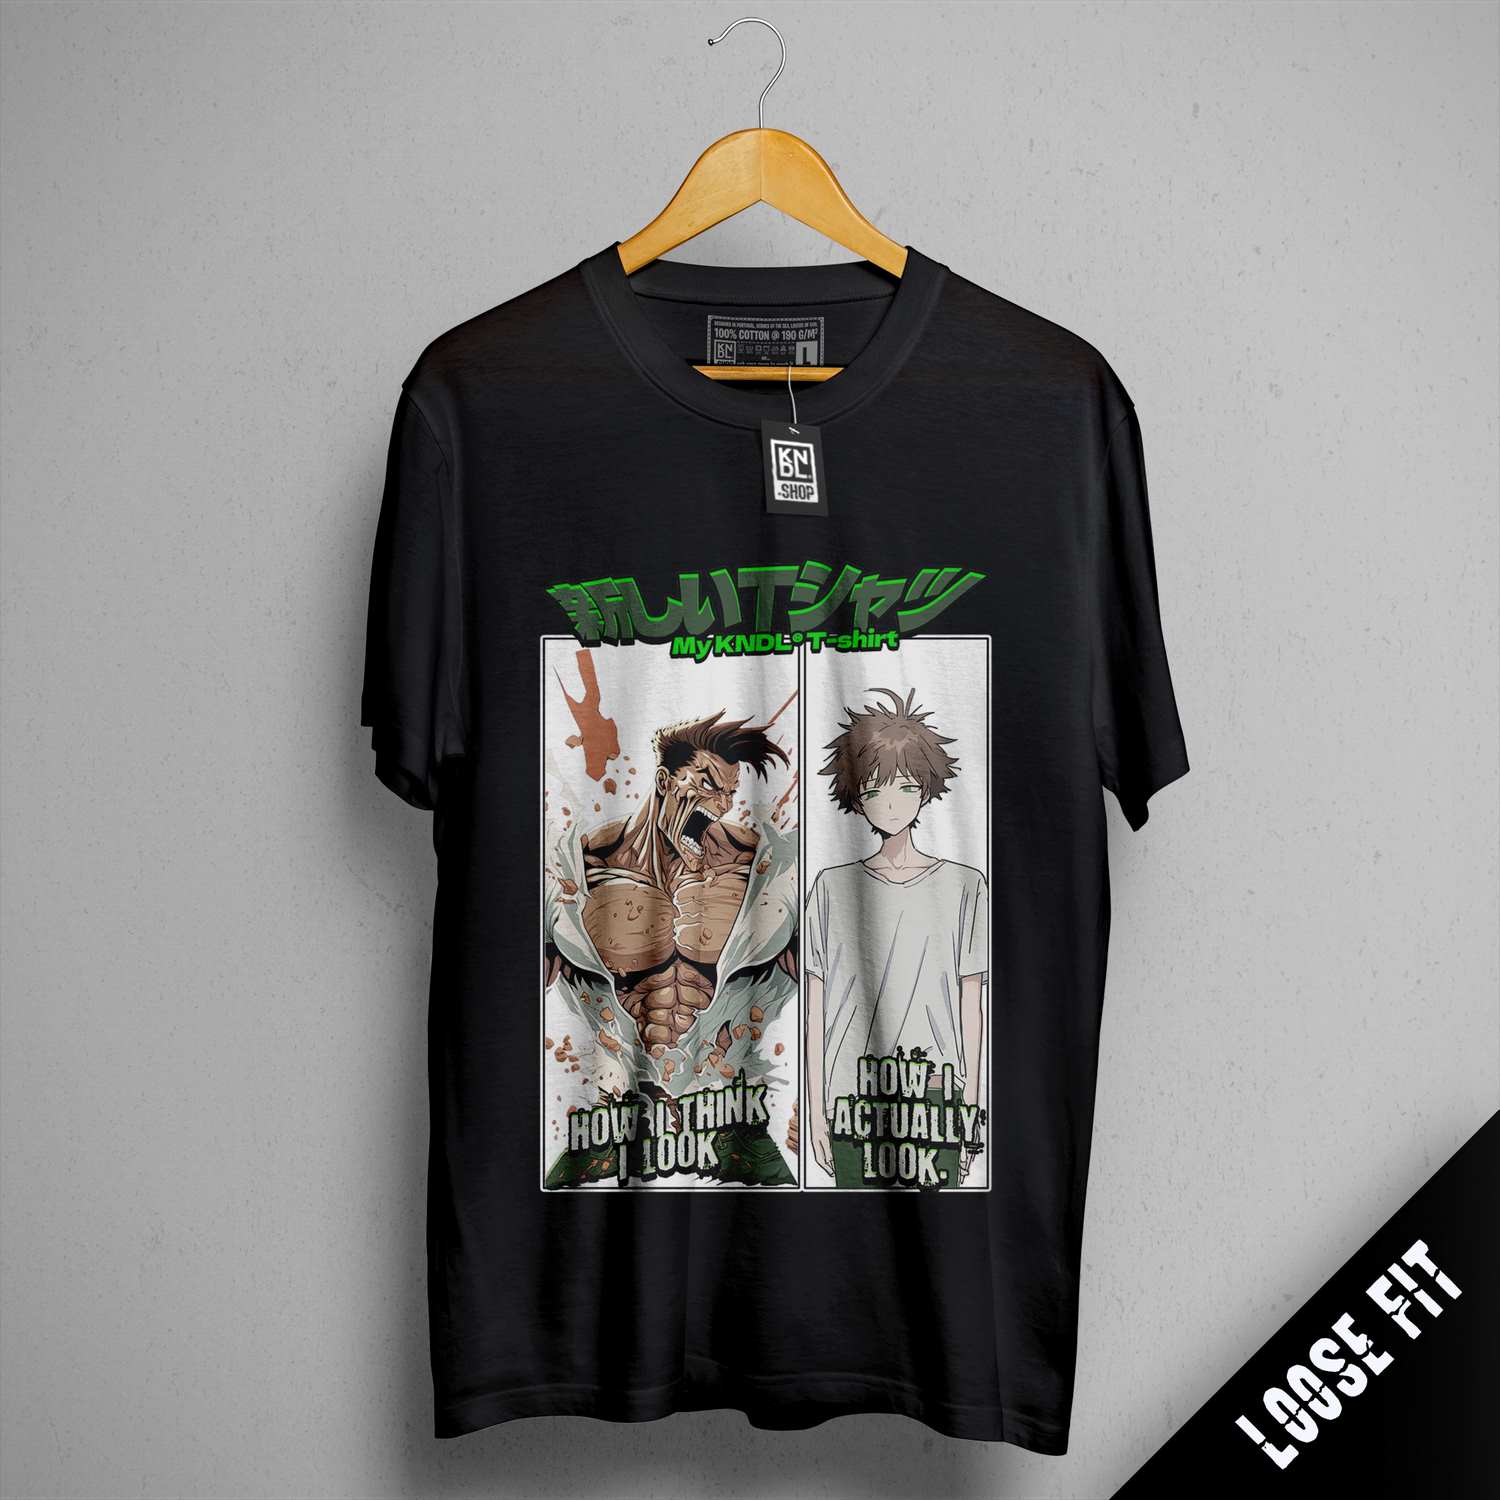 a black shirt with a picture of two anime characters on it